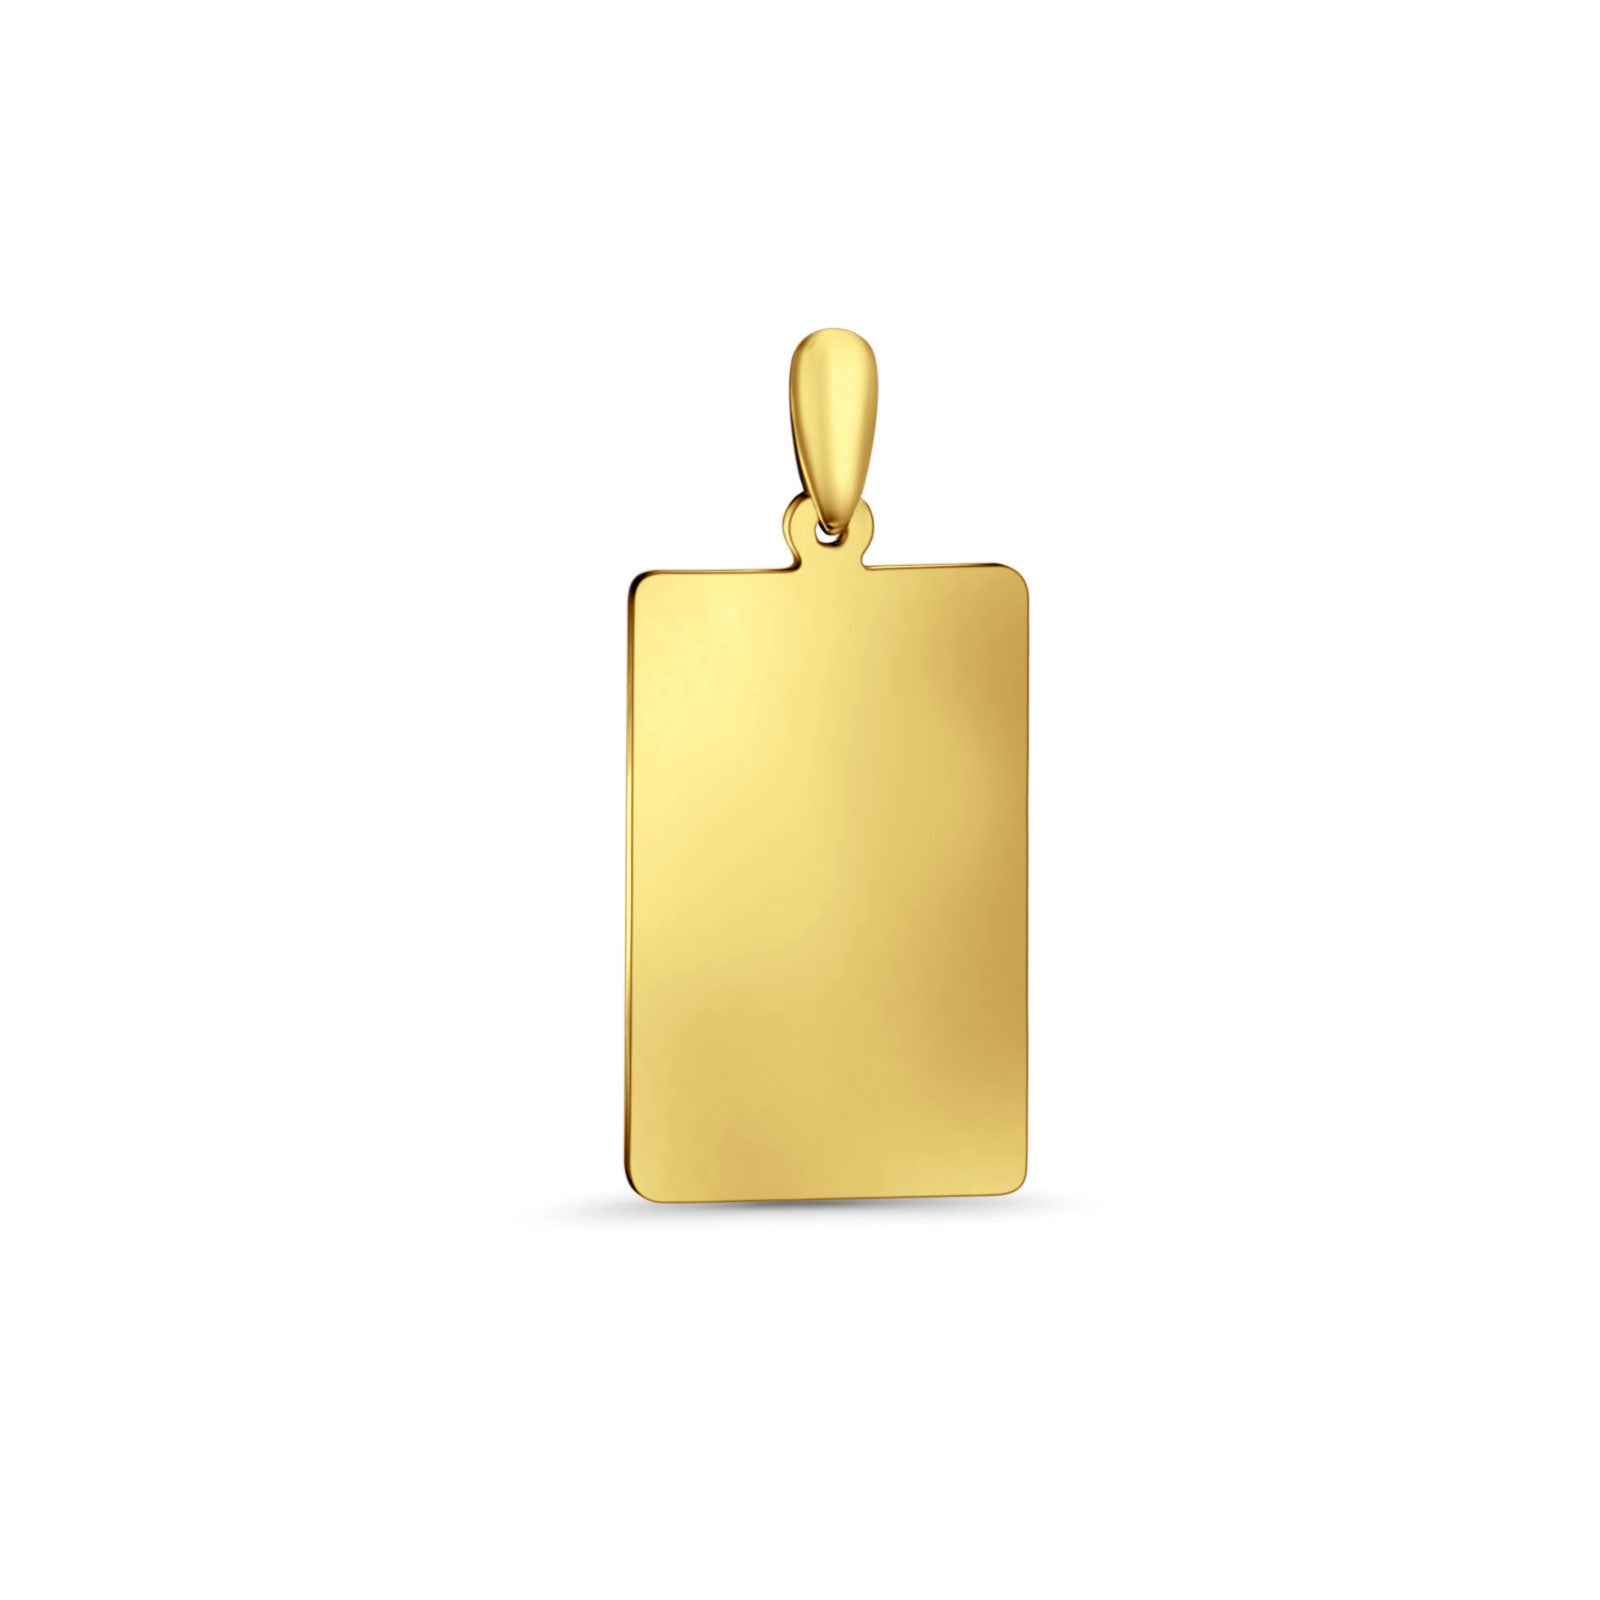 14K Yellow Gold Engravable Rectangular Pendant 30mmX14mm With 16 Inch To 24 Inch 0.8MM Width Square Wheat Chain Necklace